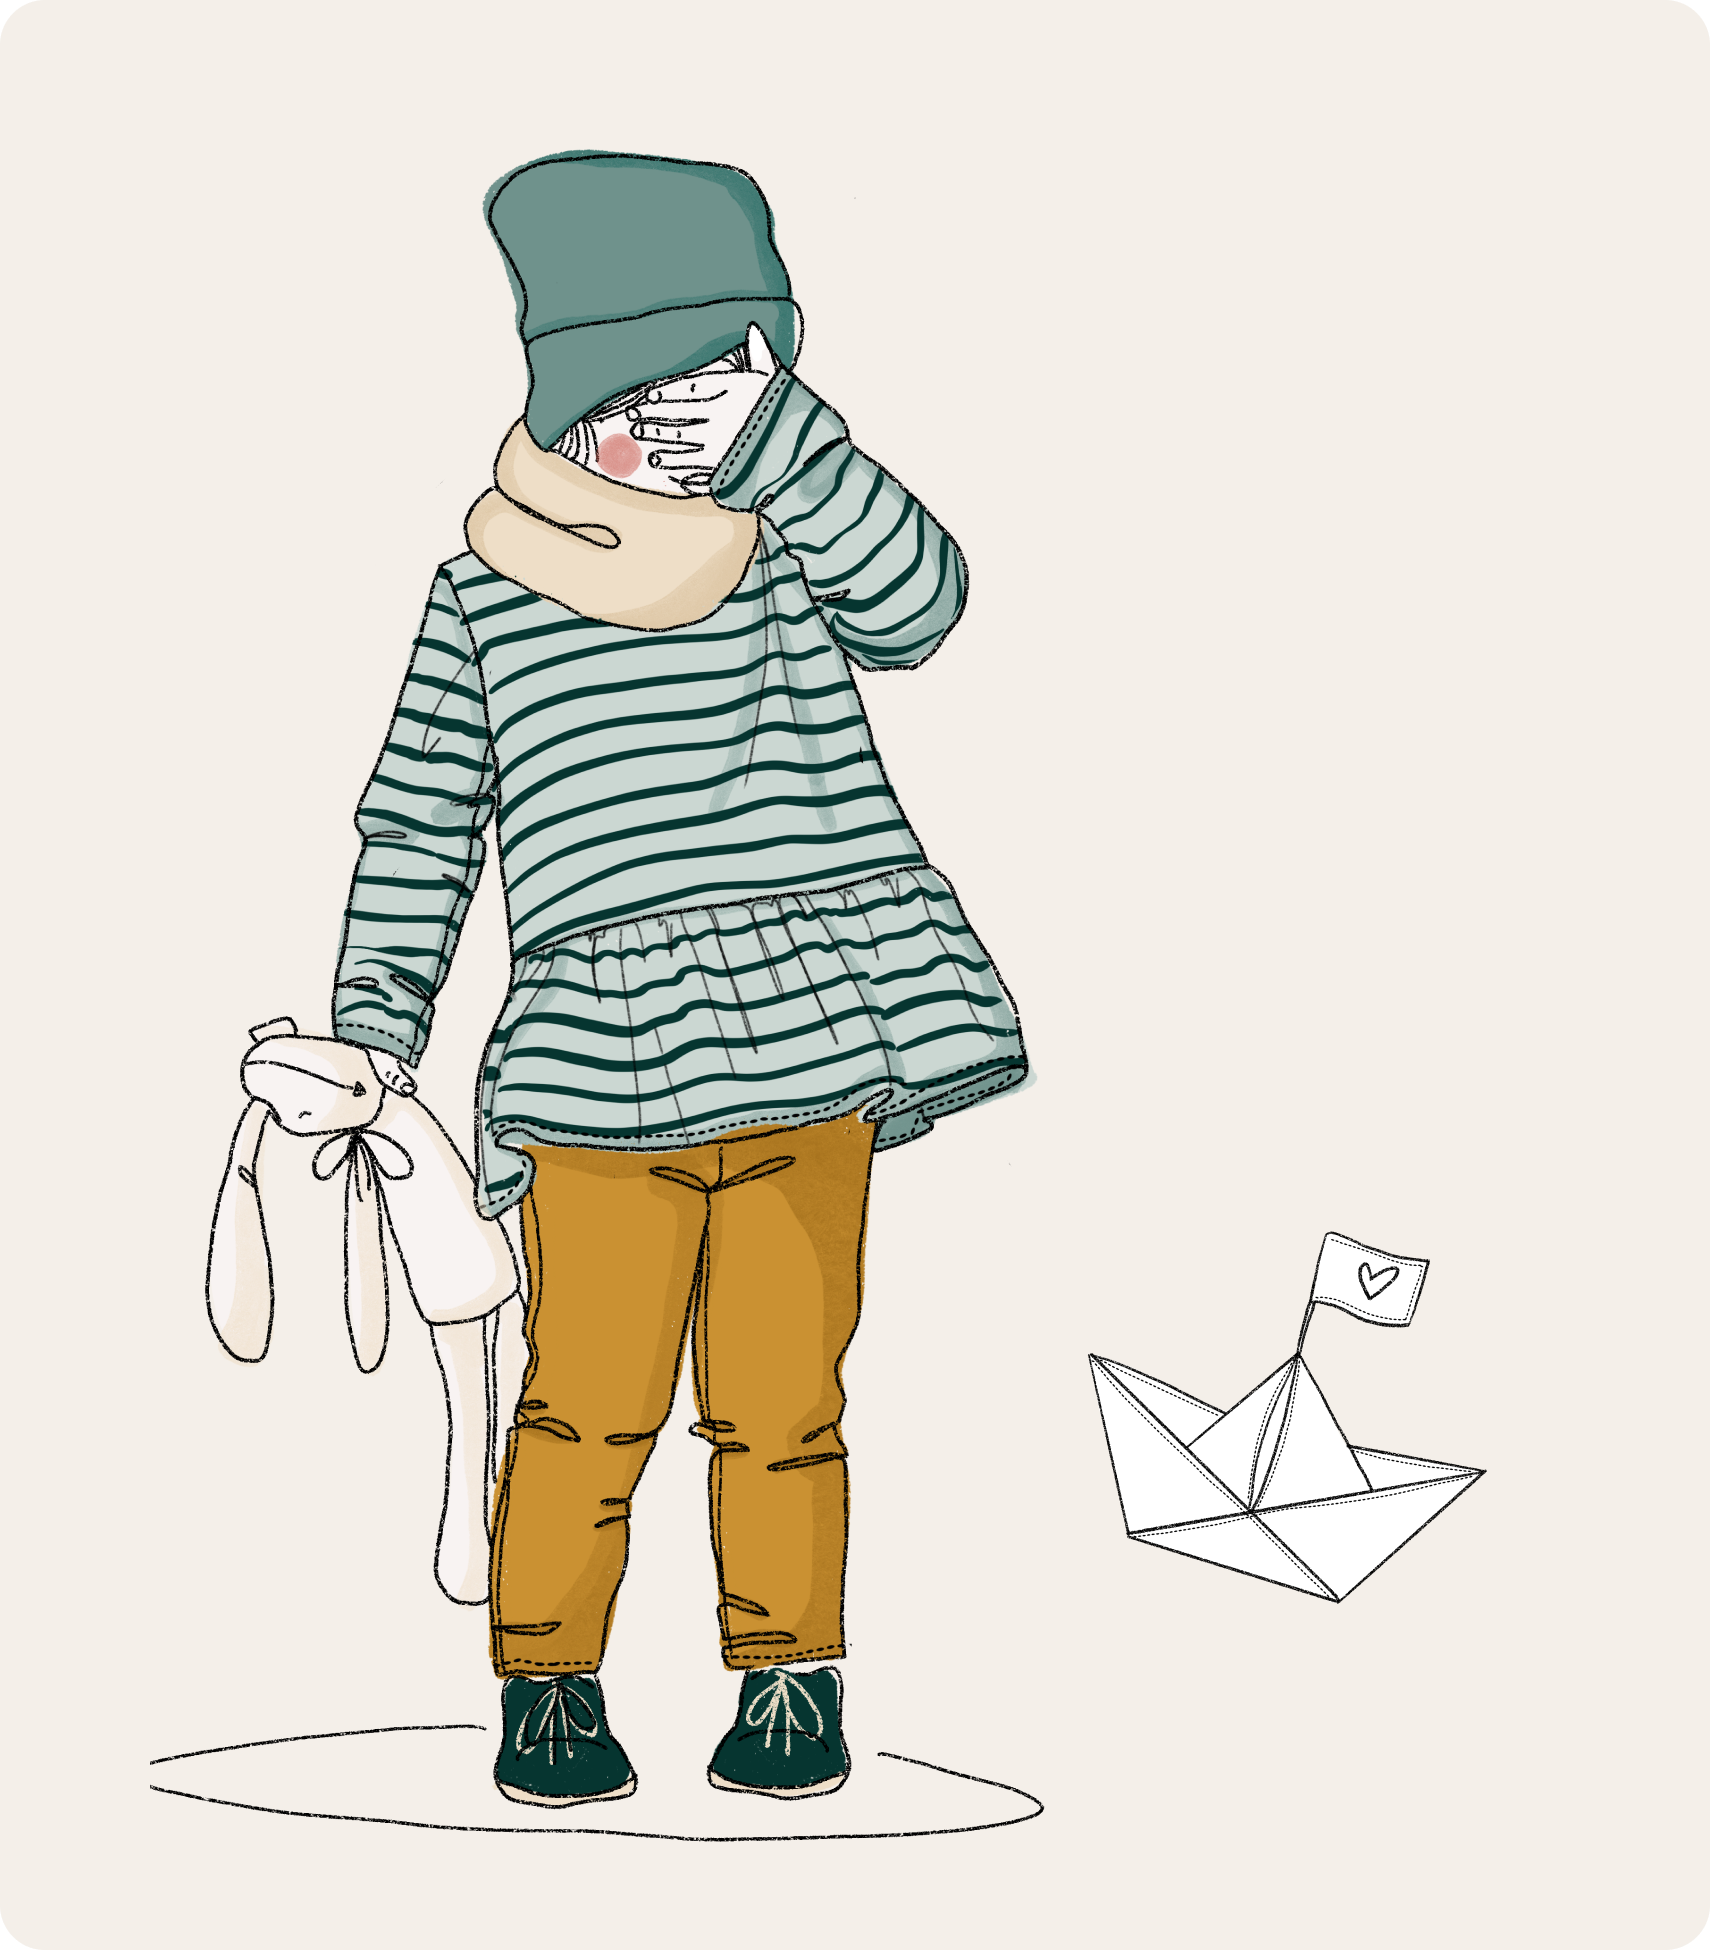 Illustration of a kid with a stuffed animal and a paper boat.